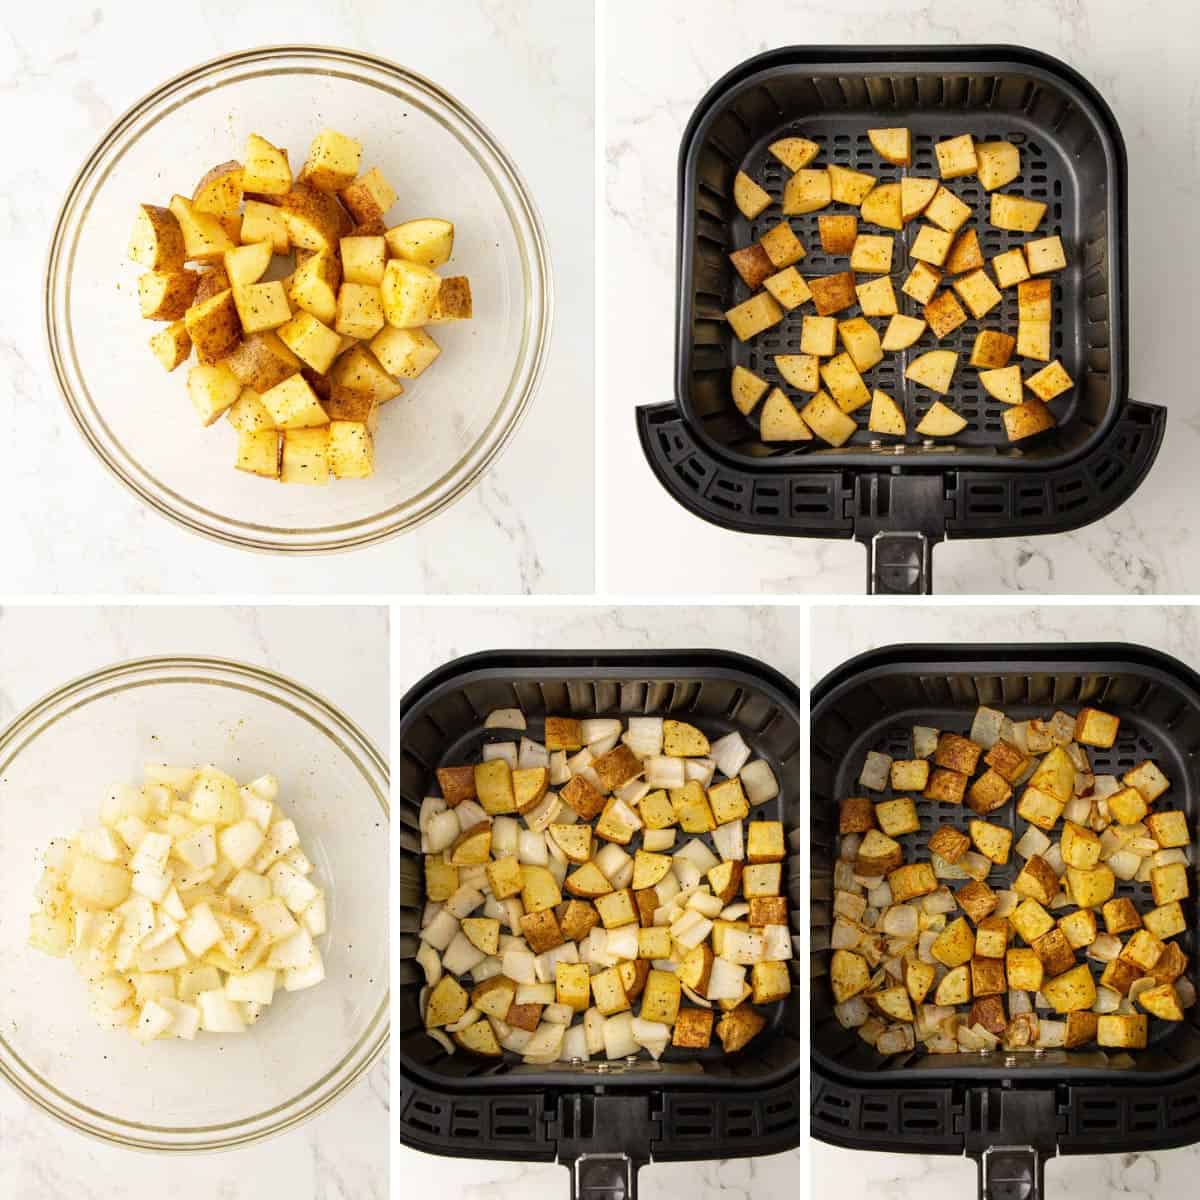 Step by step photos showing how to make air fryer potatoes and onions.